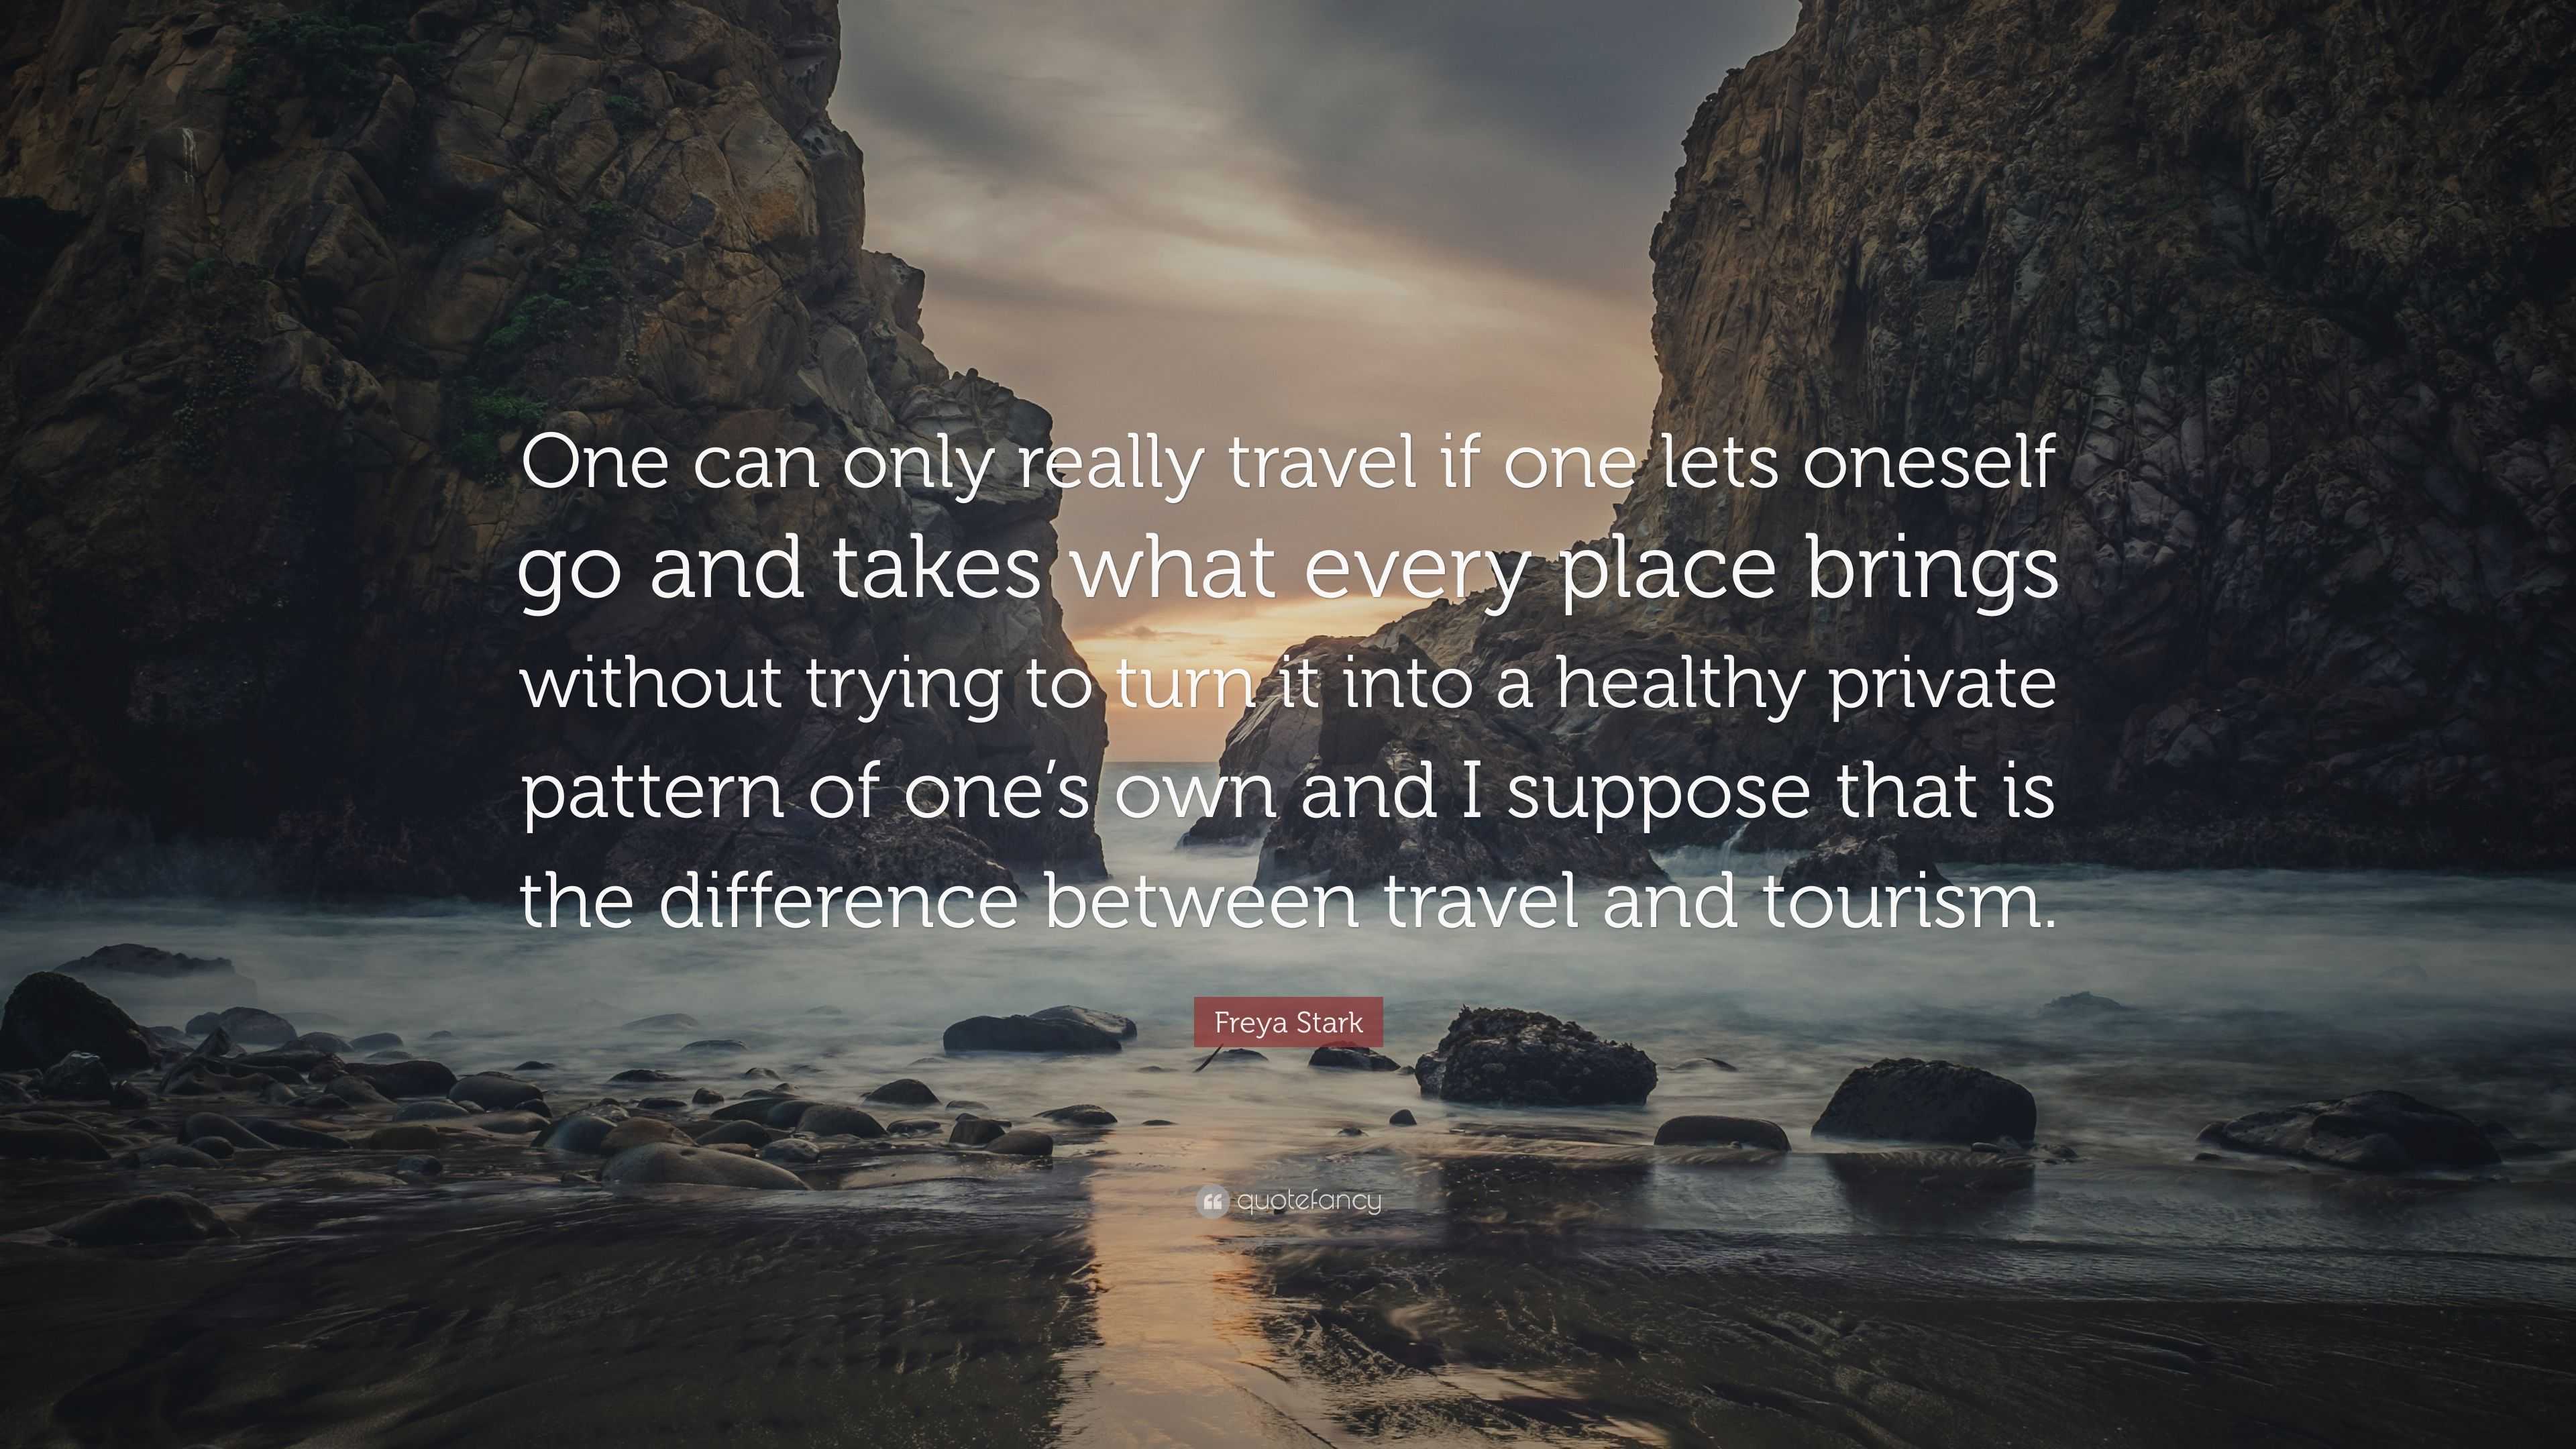 Freya Stark Quote: “One can only really travel if one lets oneself go ...